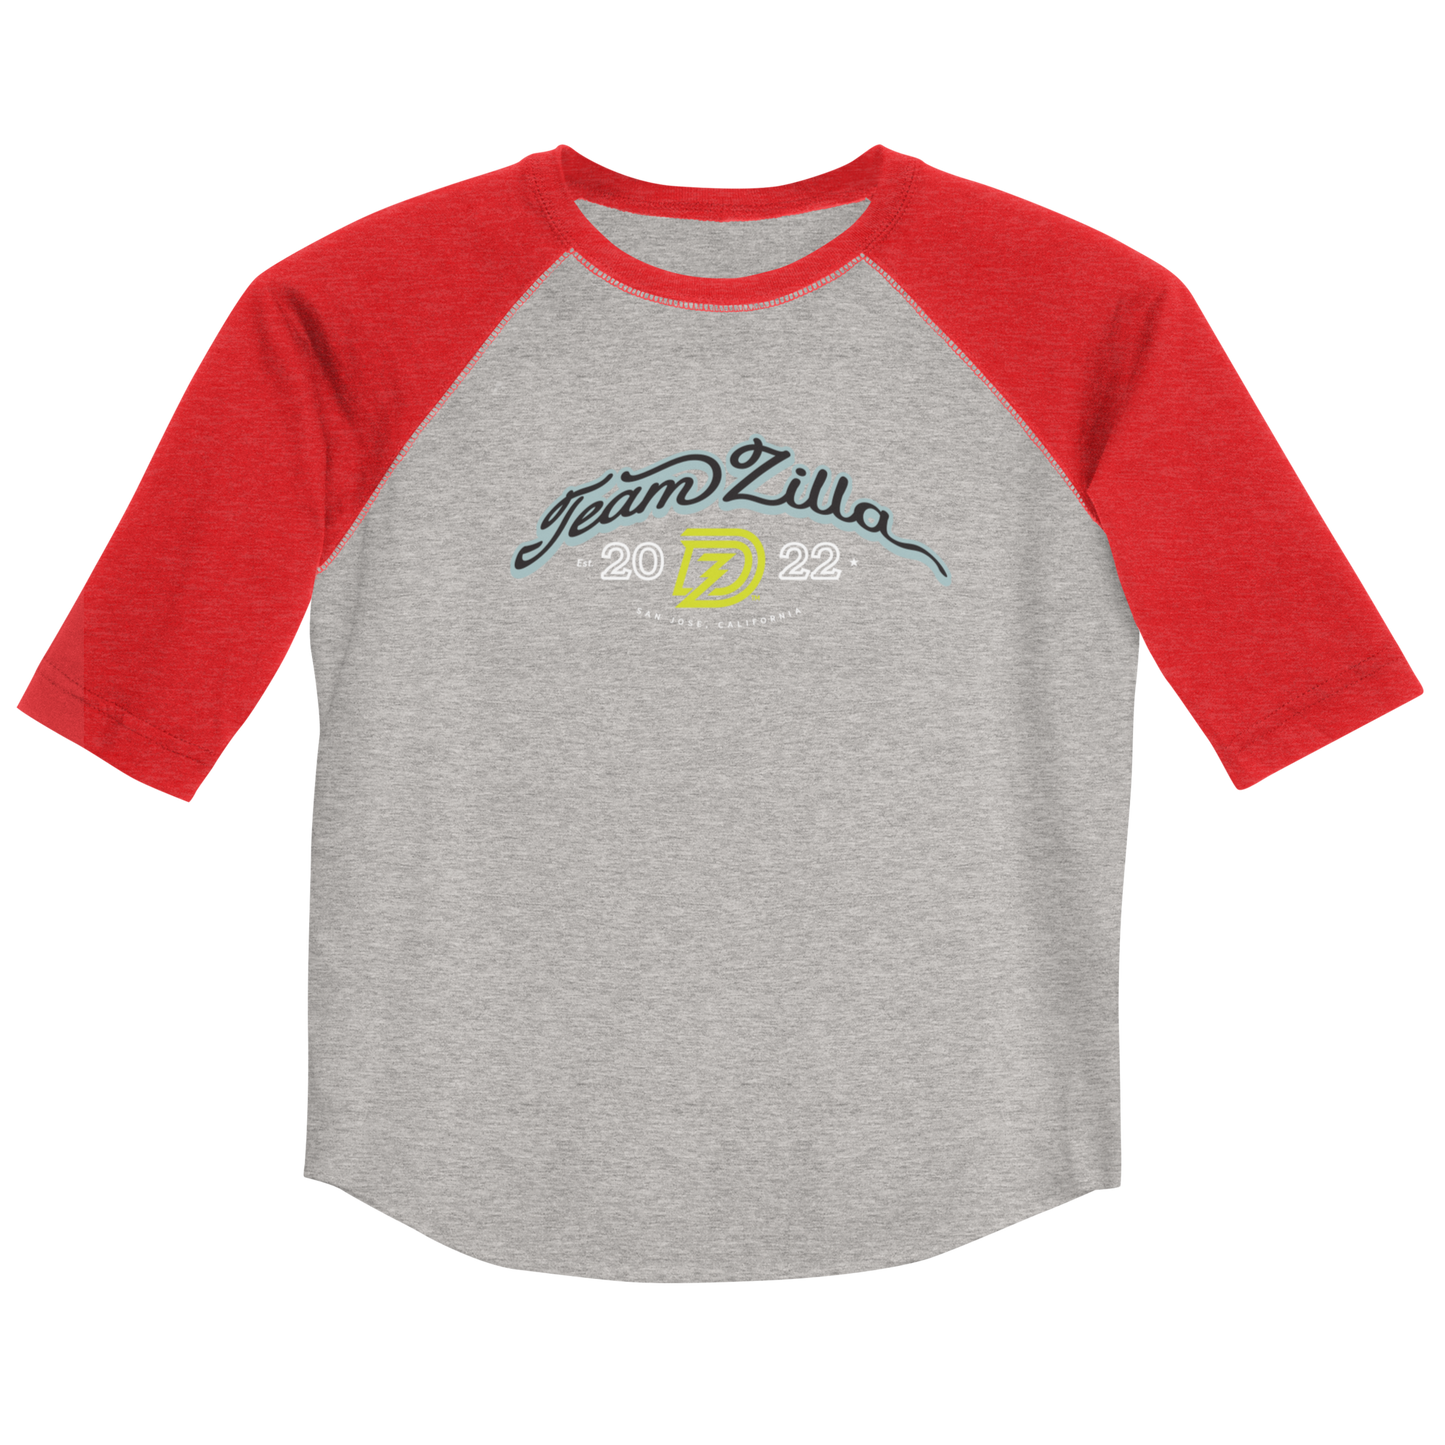 Team Zilla 2022 Youth Shirt in Vintage Heather with Vintage Red Sleeves